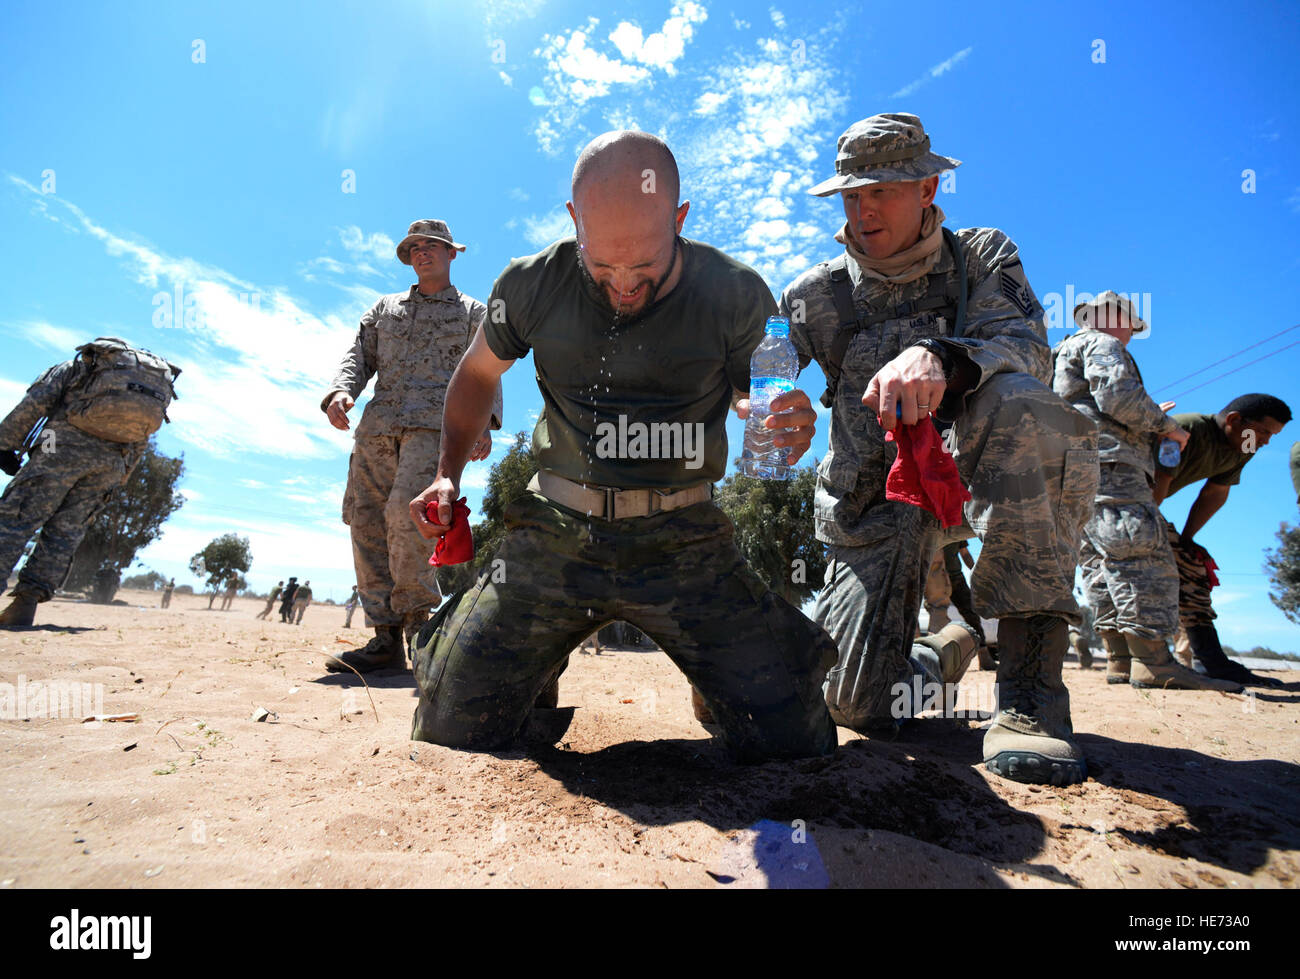 A Spanish Legion soldier recovers with the help of a U.S. Air Force master sergeant after being exposed to Oleoresin Capsicum "pepper" spray during a non-lethal weapons class as a part of AFRICAN LION 16 at Tifnit, Kingdom of Morocco, April 23, 2016. Of the 11 nations participating in the annual exercise, a group of U.S. military members, Royal Moroccan armed forces members, Spanish Legion soldiers and Royal Netherlands army soldiers lived in field conditions and participated in daily familiarization with other nation’s tactics to improve interoperability.  Senior Airman Krystal Ardrey Stock Photo